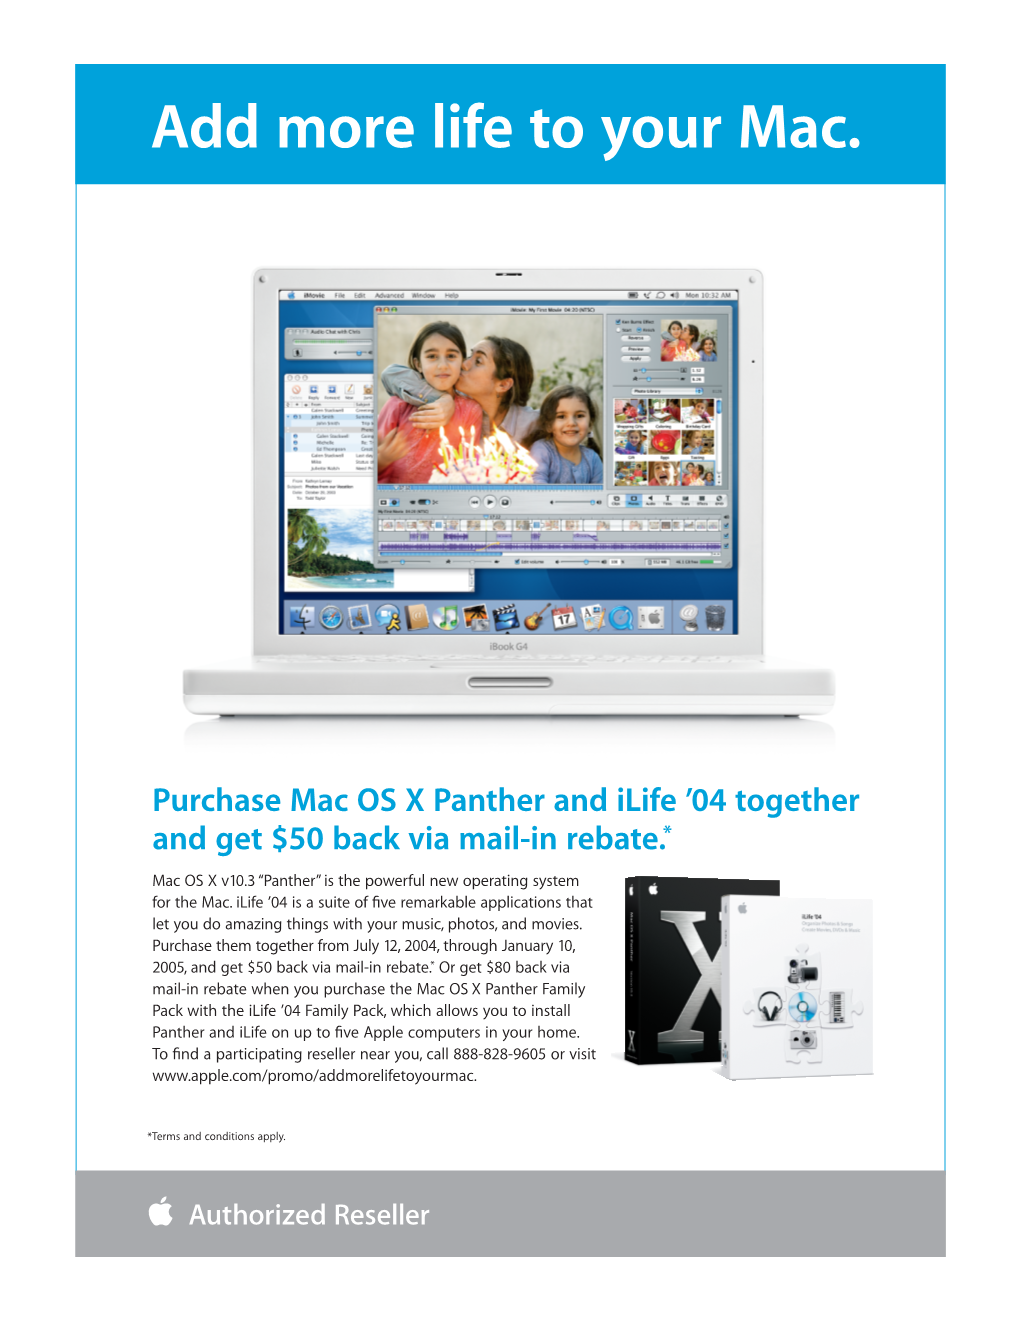 Add More Life to Your Mac. Purchase Mac OS X Panther and Ilife